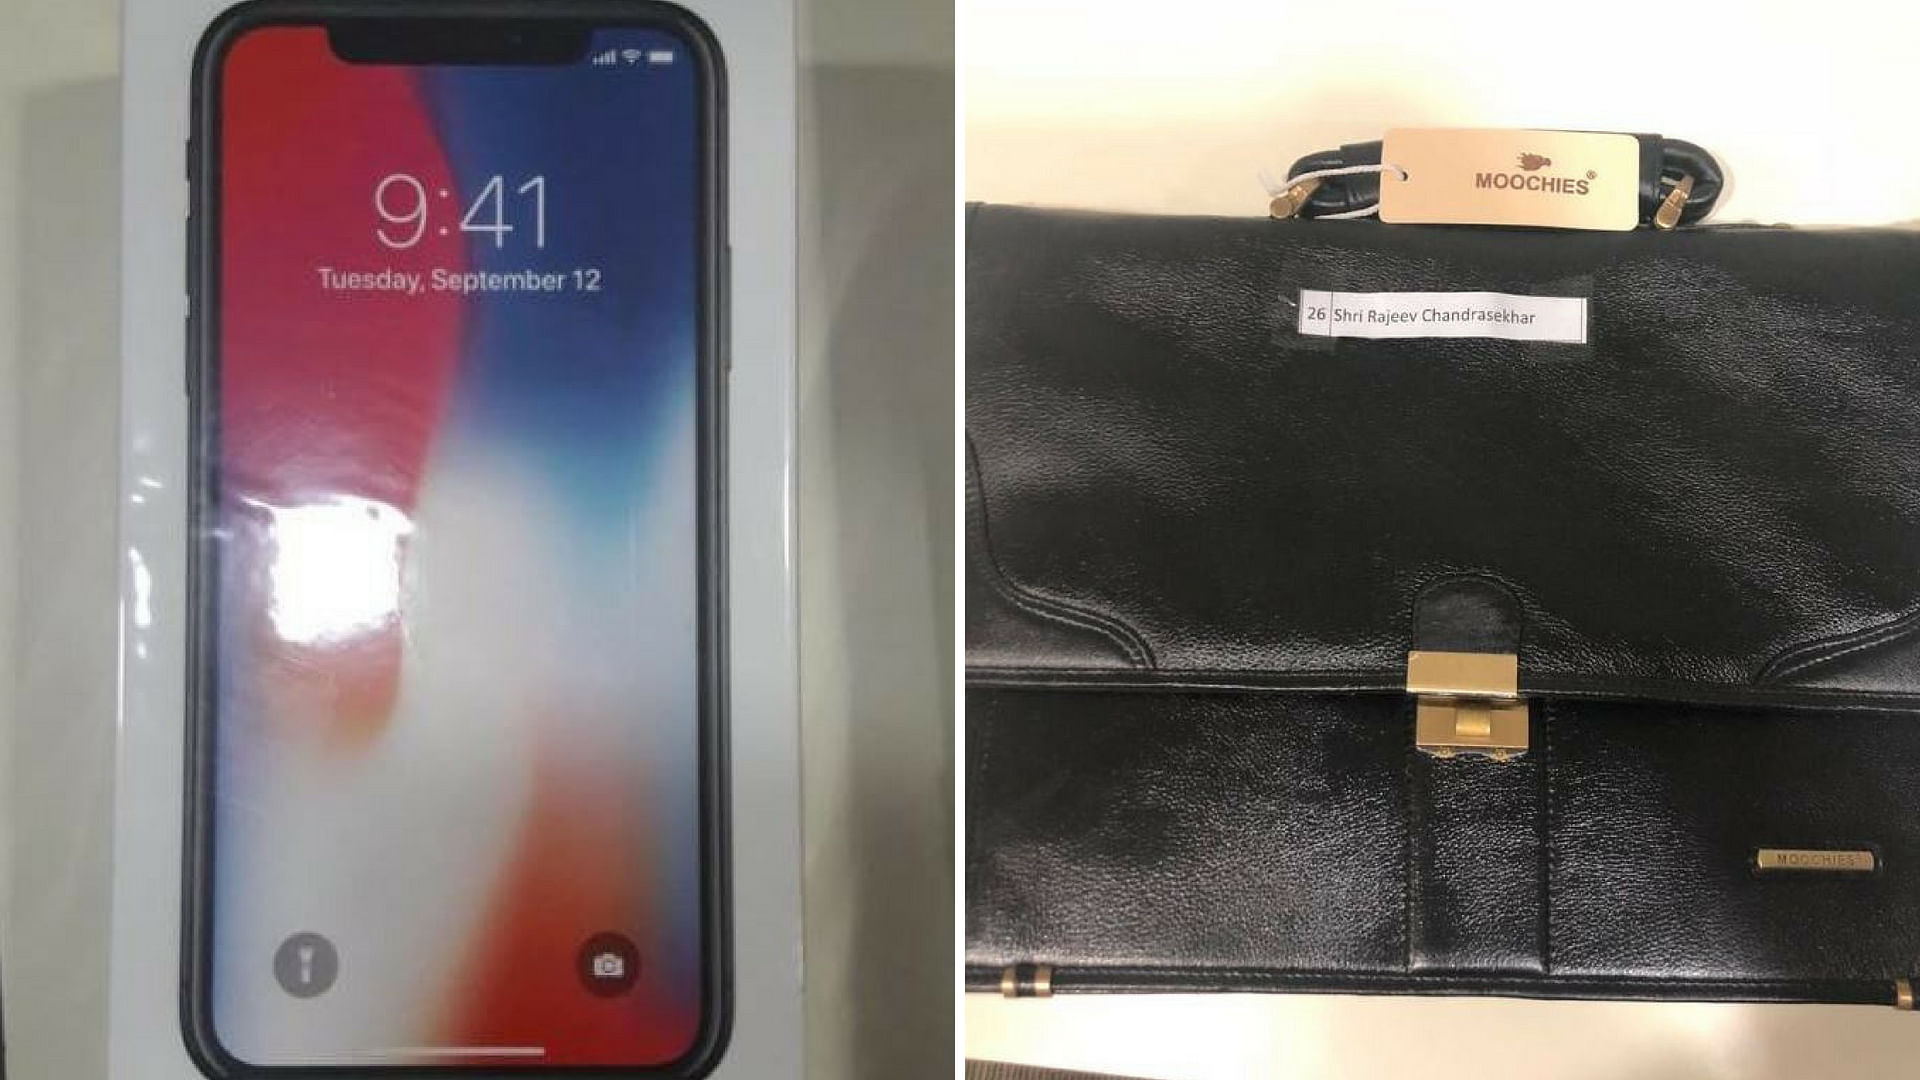 A controversy has erupted over expensive iPhones gifted to MPs from Karnataka.